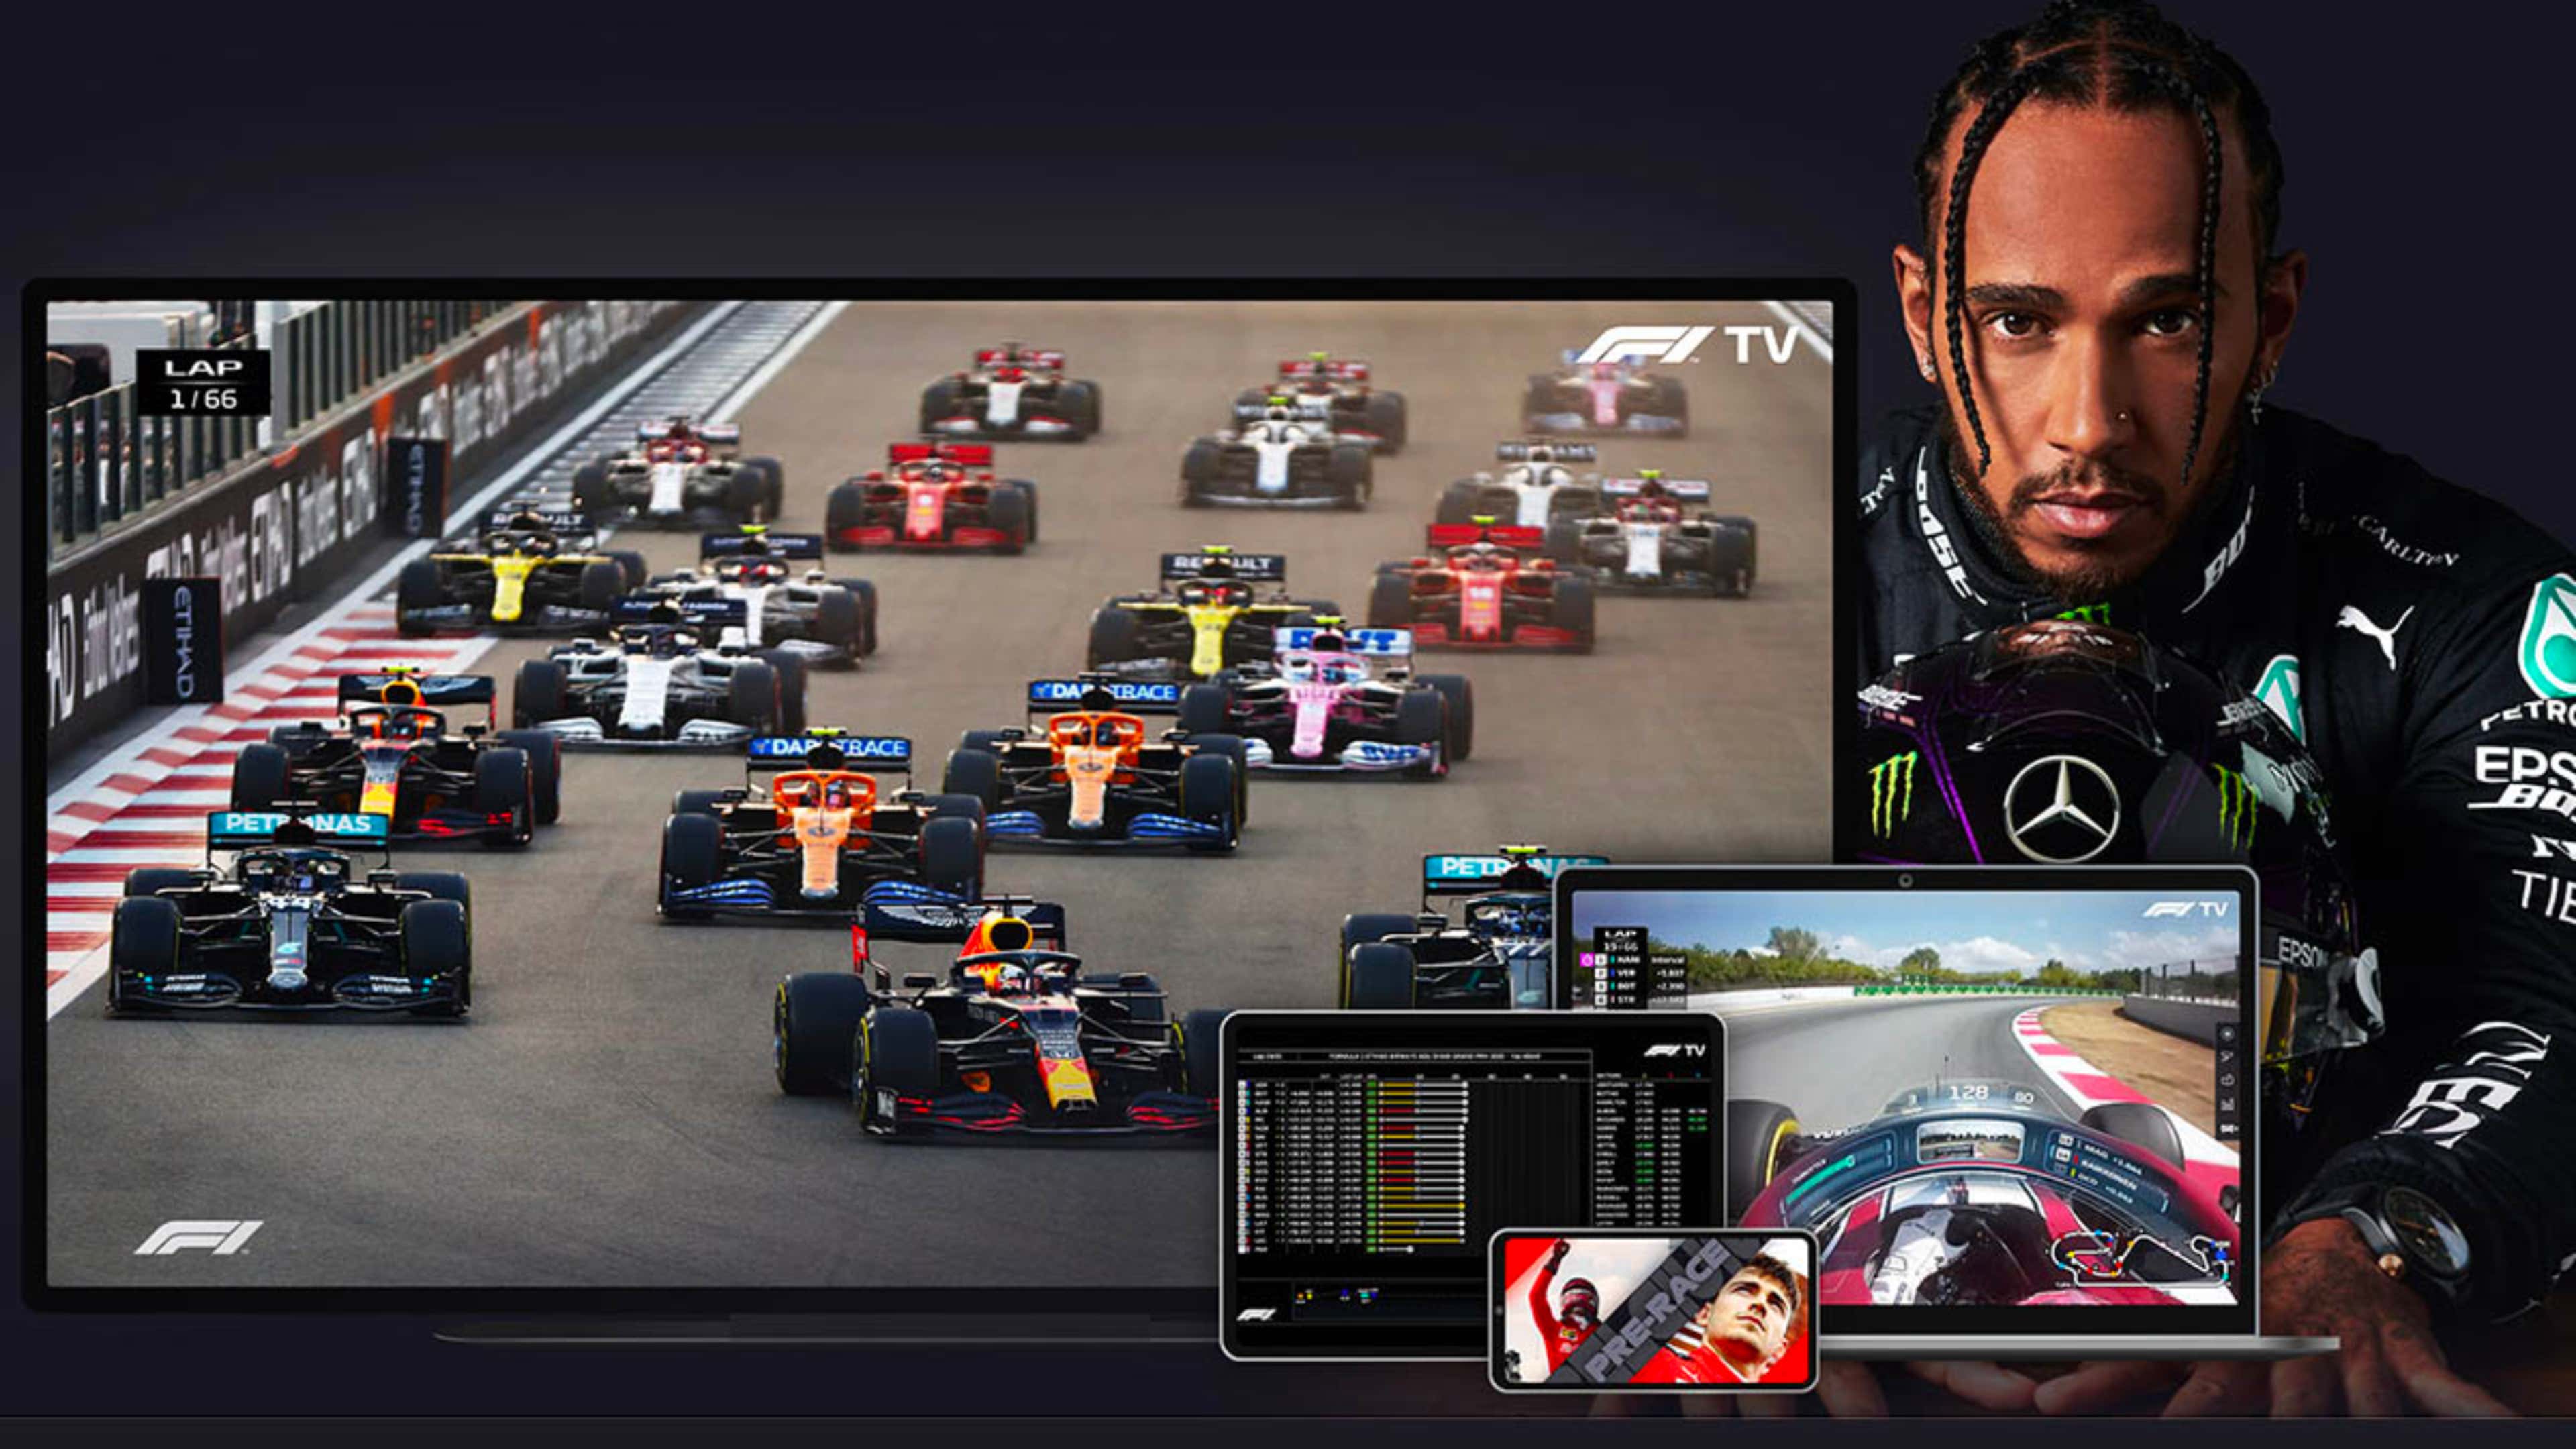 LIVESTREAM: Watch the action from Round 1 of the F1 Sim Racing